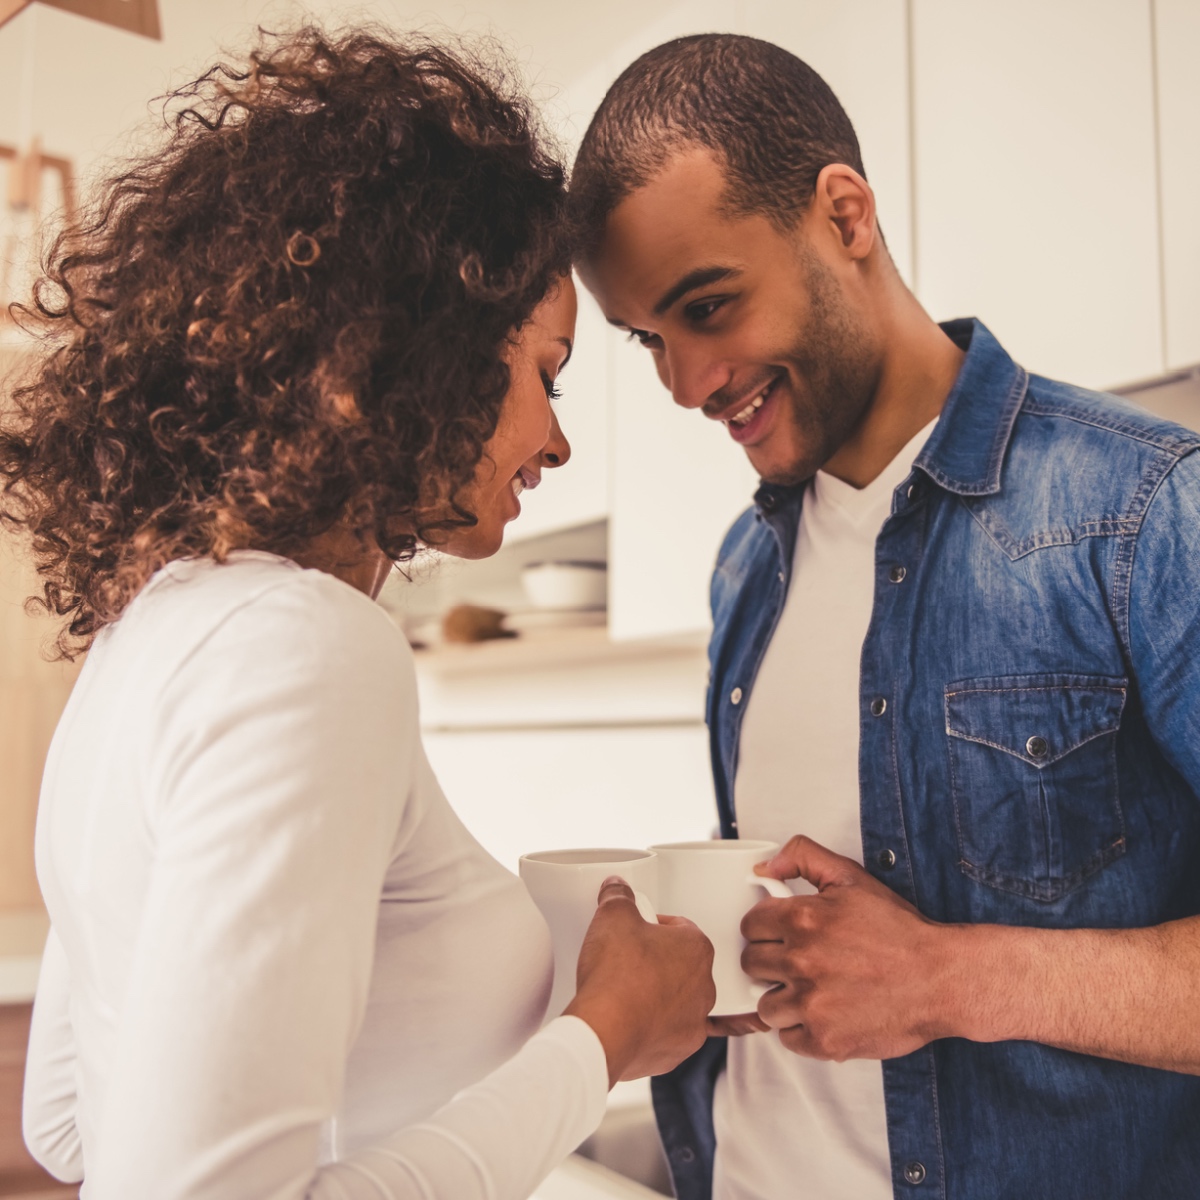 Kingwood IVF from a Partner's Perspective: 5 Ways to Support Your Significant Other